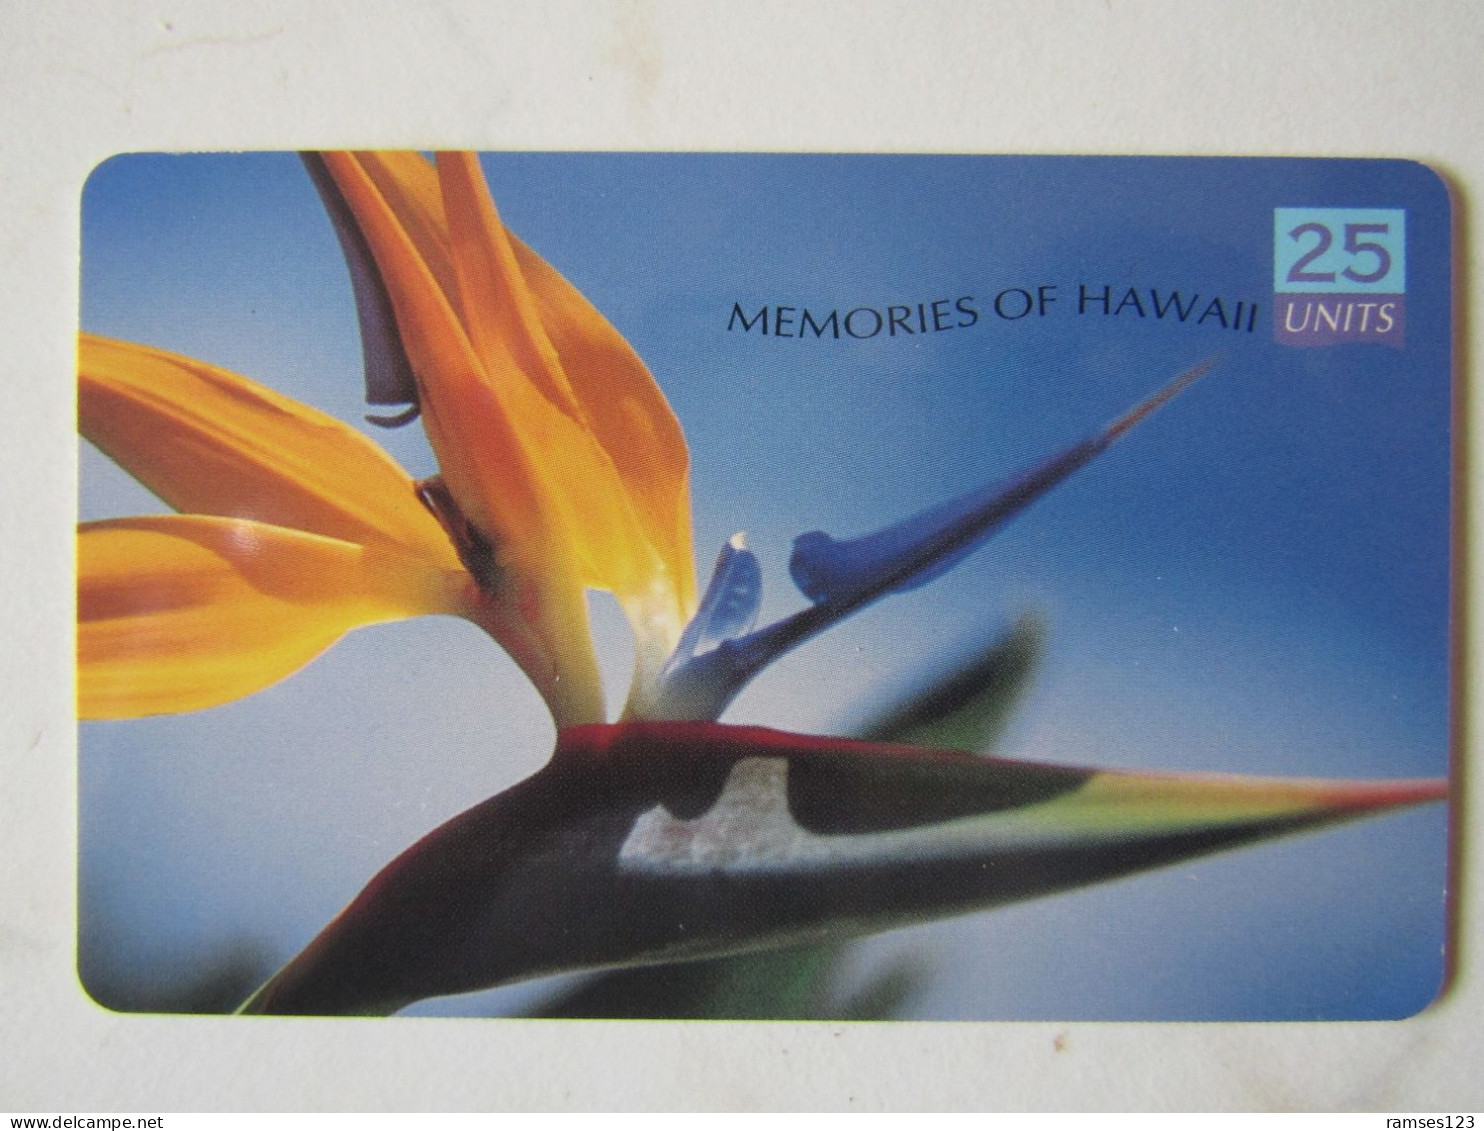 VERY RARE   MEMORIES OF HAWAII  25 UNITS  FLOWERS   1000  ISSUED  TOP MINT - Hawaii